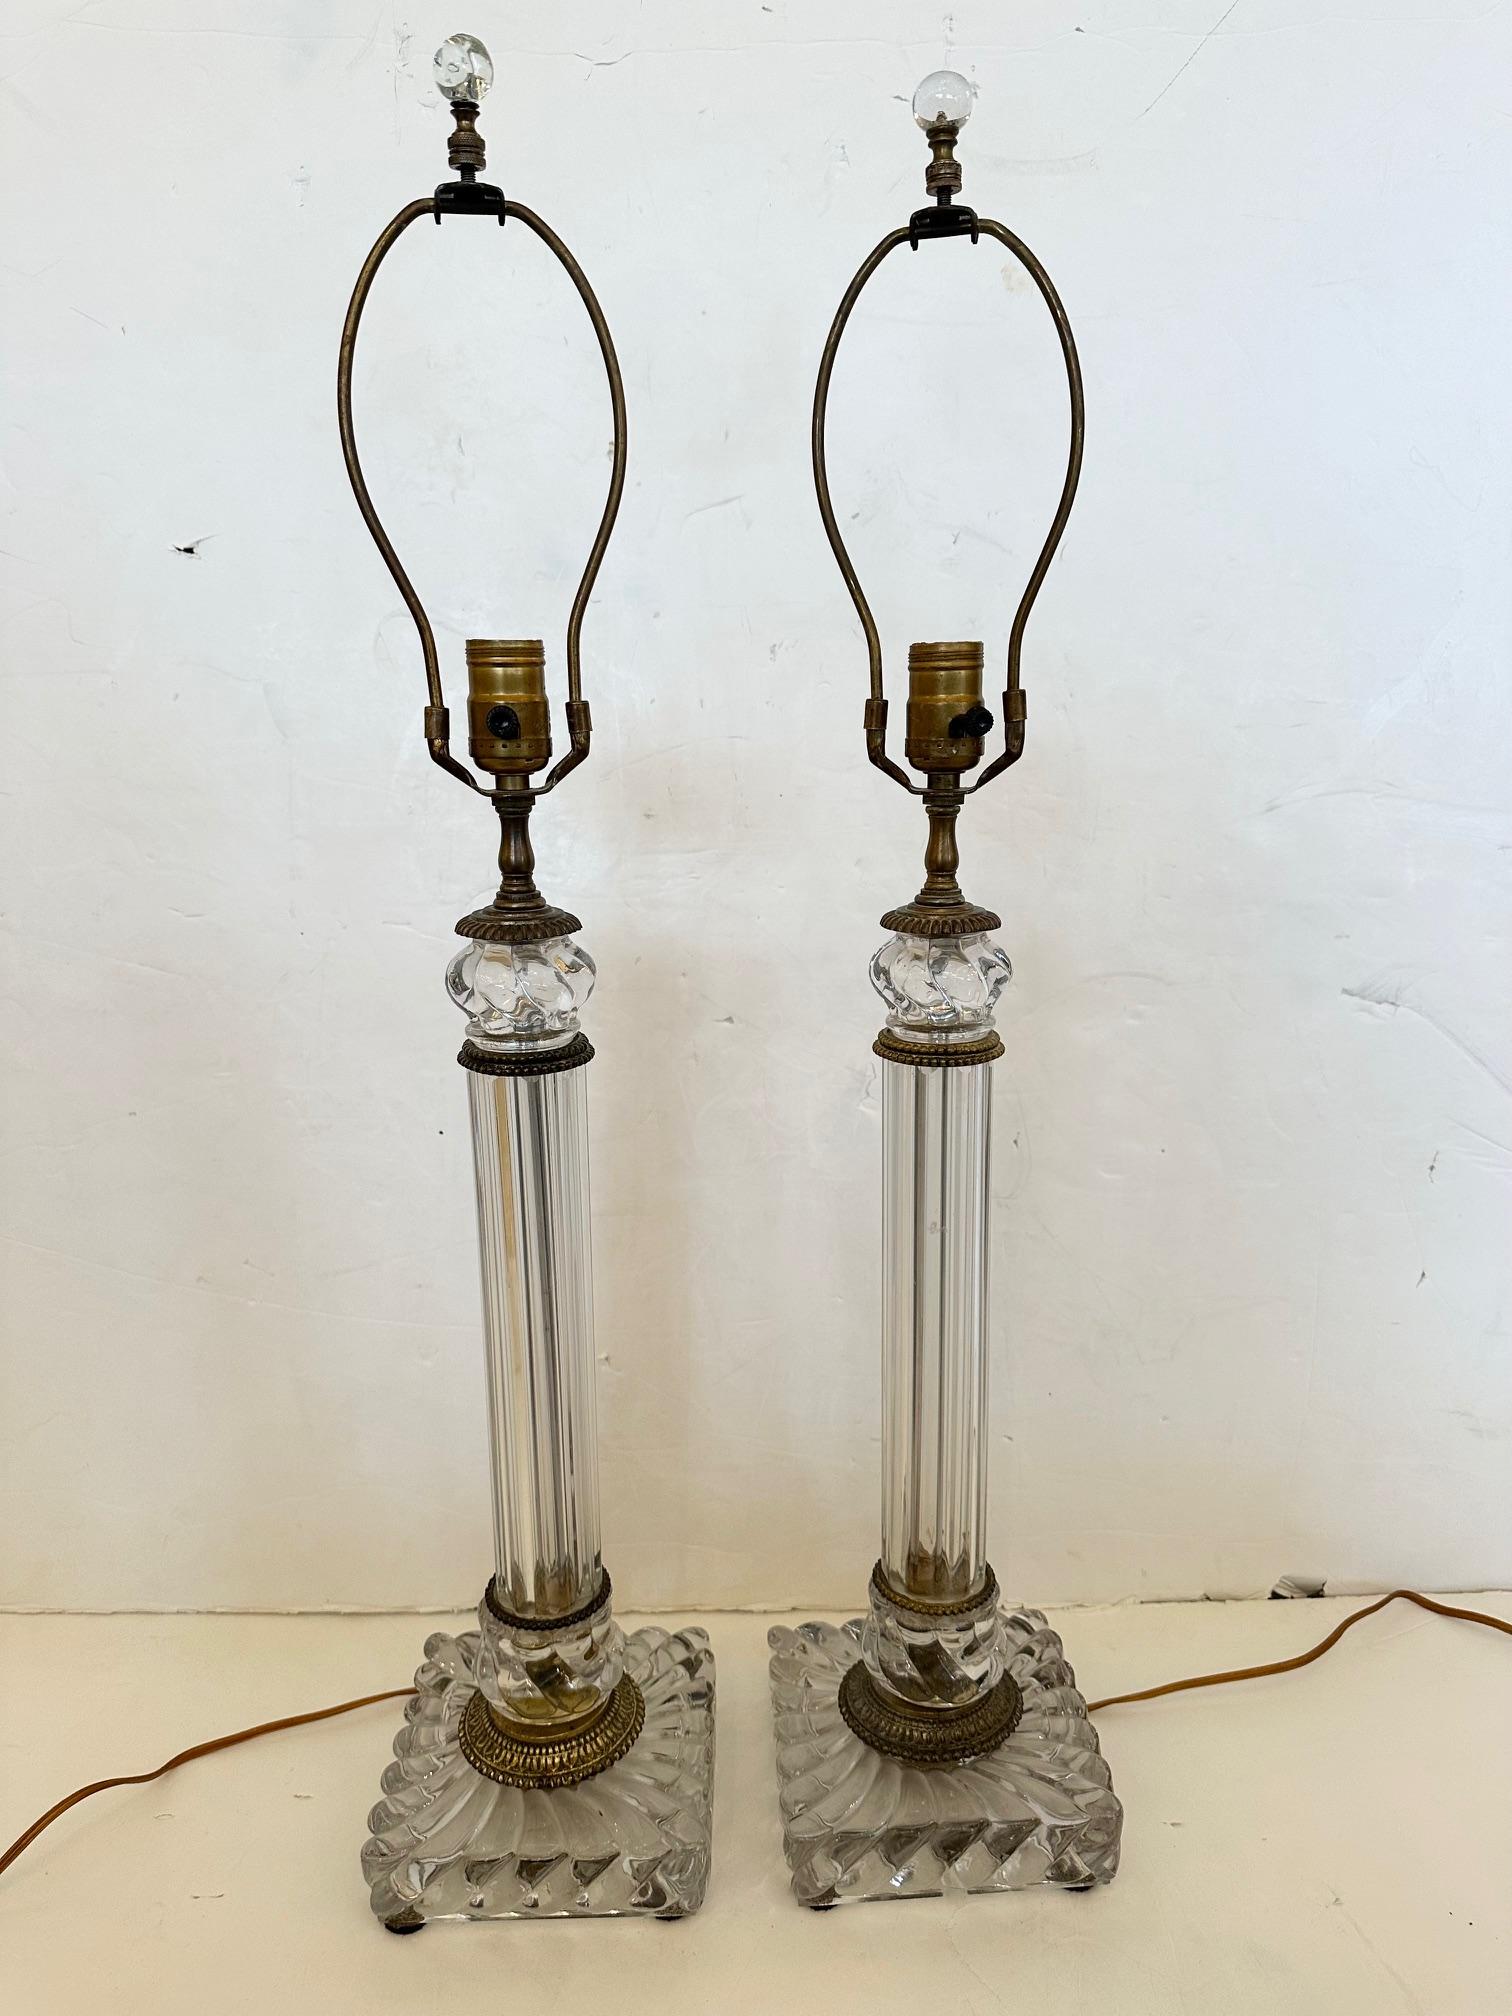 Classically elegant pair of handblown fluted glass columnar lamps by Baccarat with bronze mounts. 